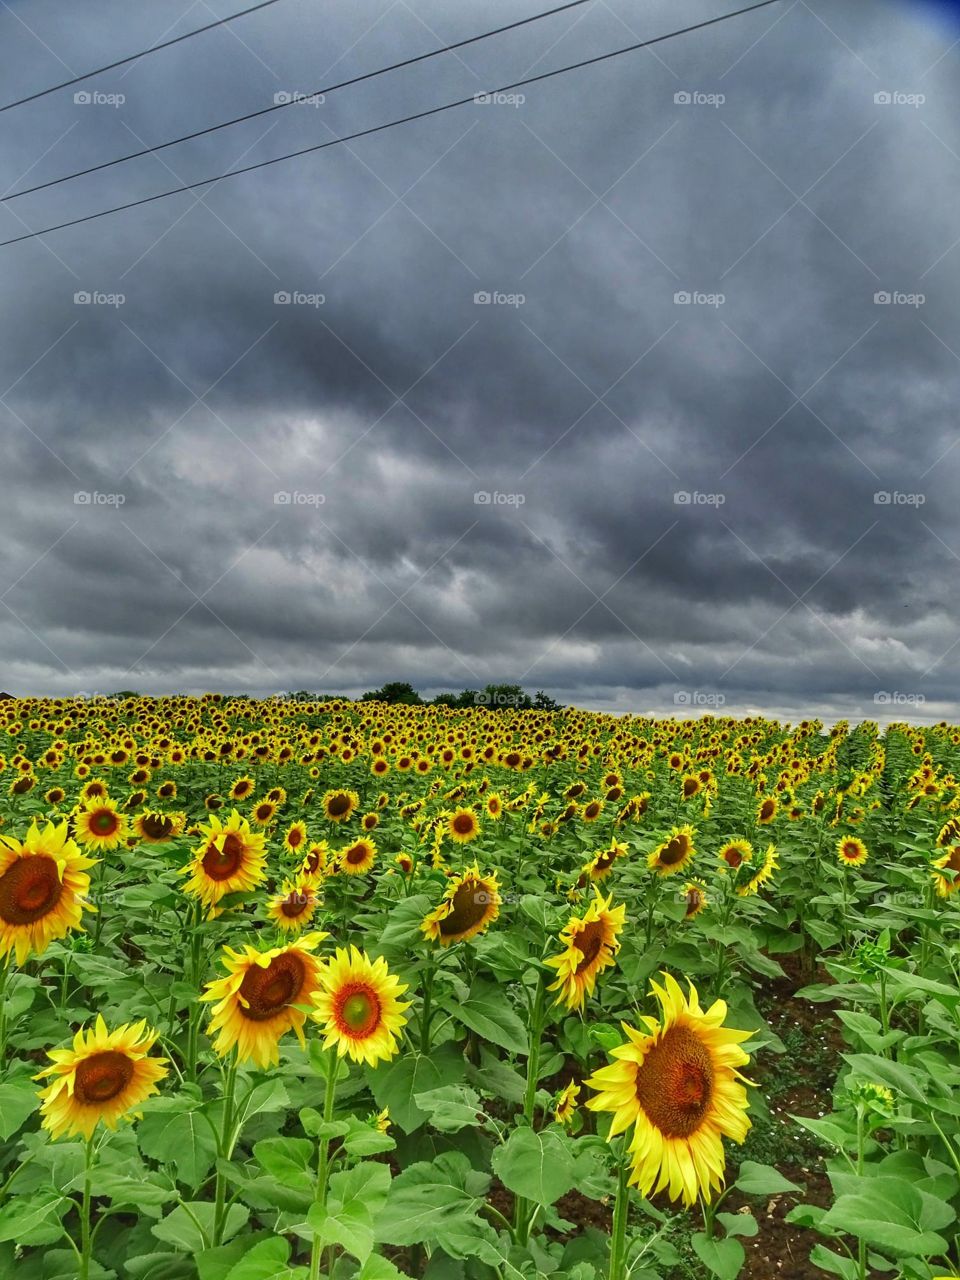 Sunflowers in the Storm 